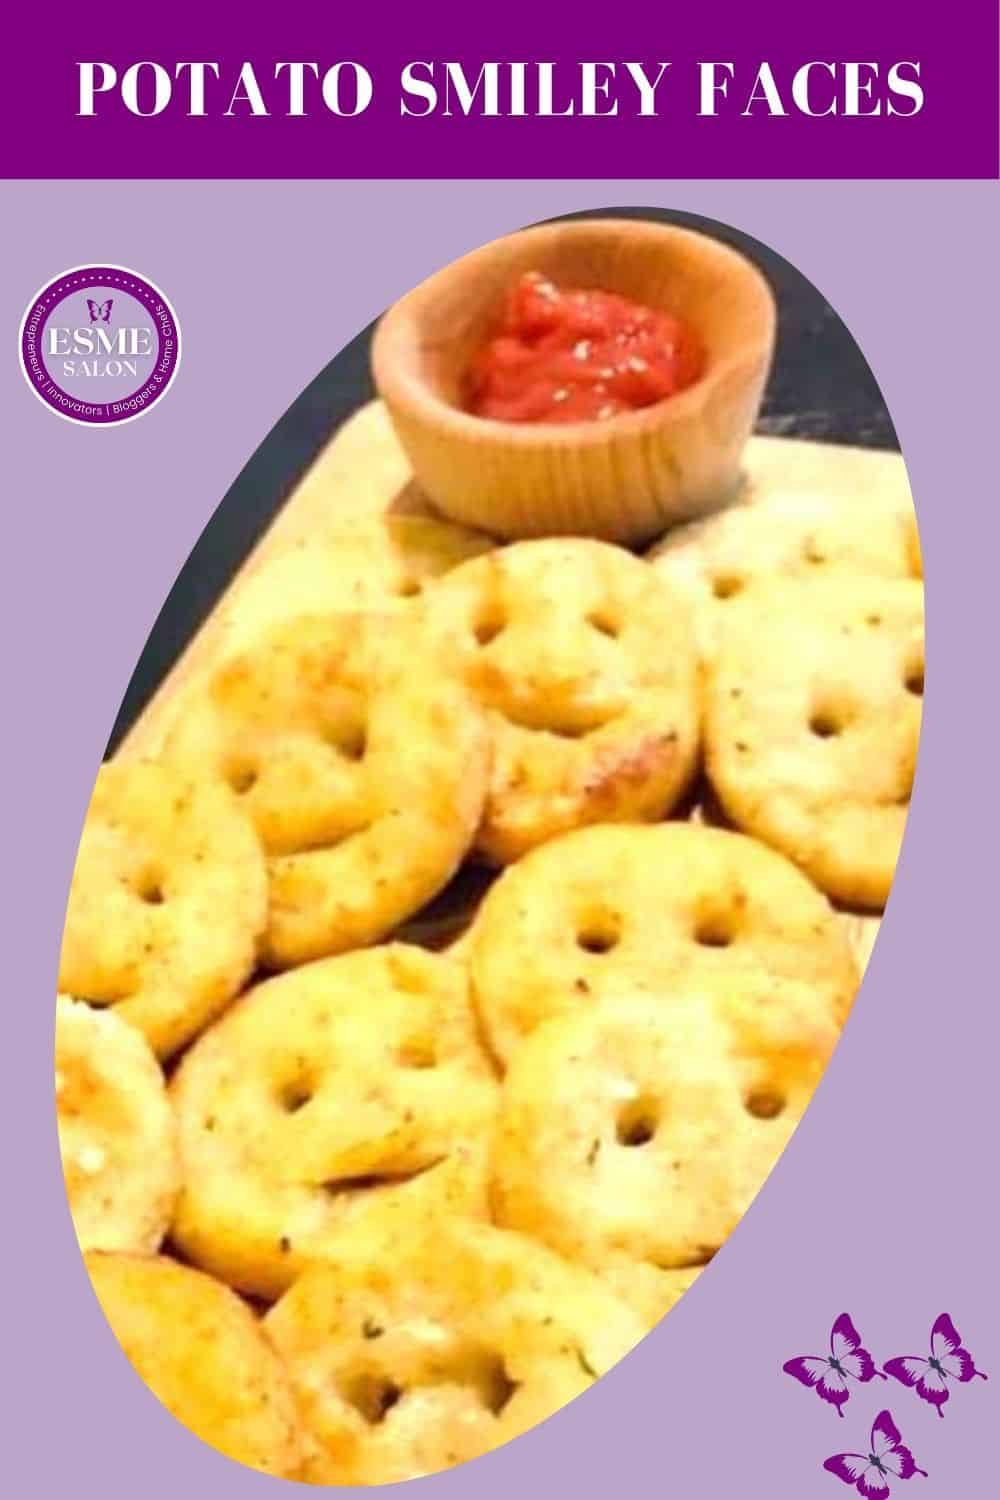 Smiley faces biscuits made from potato with tomato dip in a brown wooden bowl